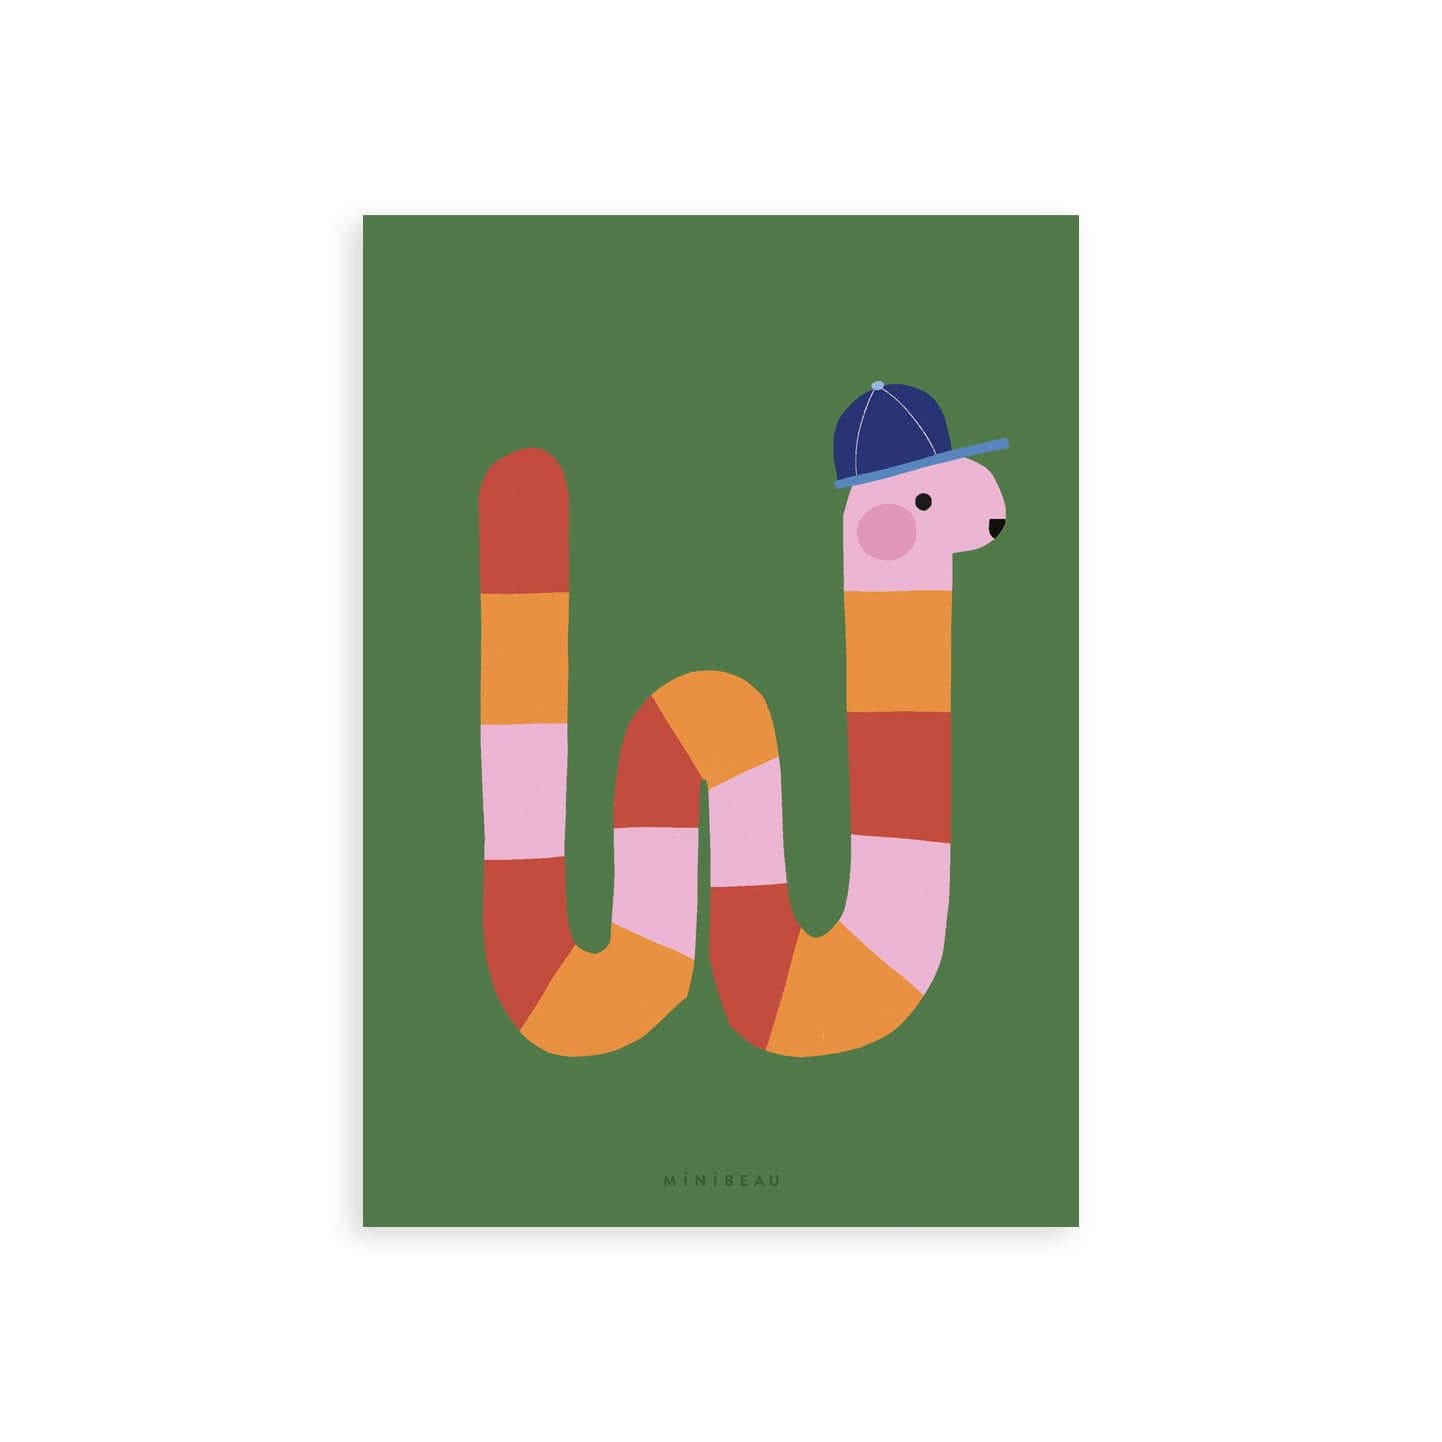 Our Happy Alphabet 'W' Art Print shows a pink, red and orange wriggly worm in the shape of a W. The worm is wearing a blue baseball cap and is on a green background.